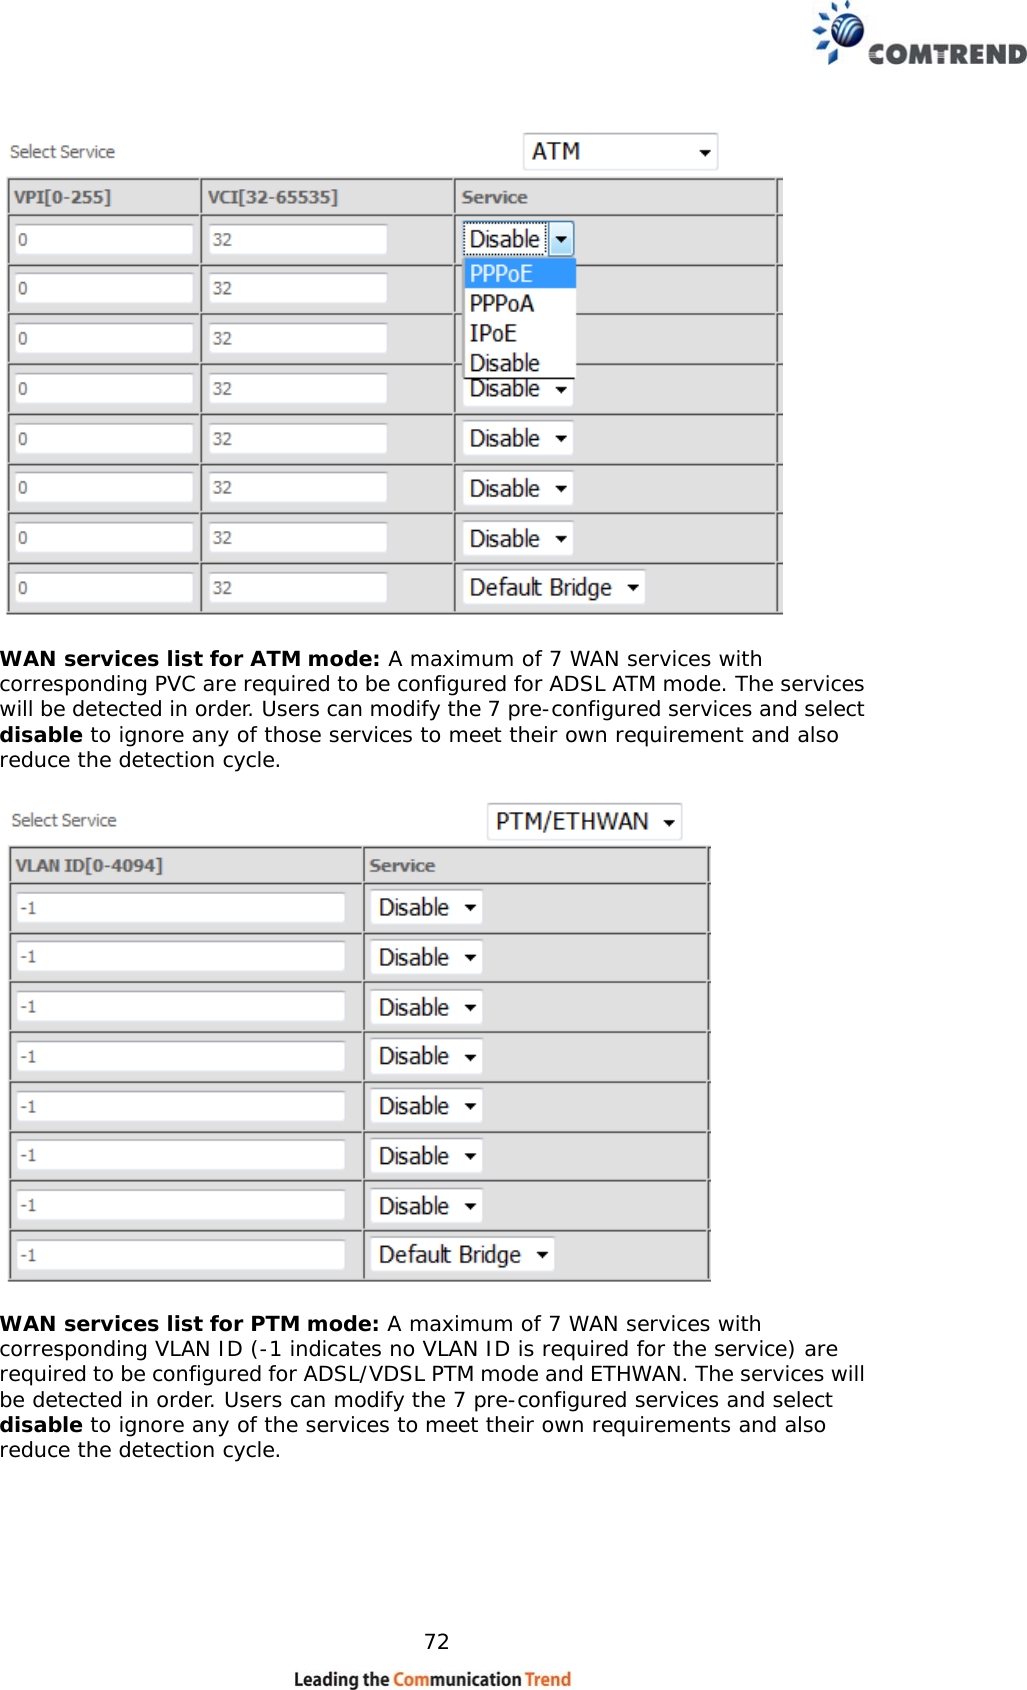    72   WAN services list for ATM mode: A maximum of 7 WAN services with corresponding PVC are required to be configured for ADSL ATM mode. The services will be detected in order. Users can modify the 7 pre-configured services and select disable to ignore any of those services to meet their own requirement and also reduce the detection cycle.    WAN services list for PTM mode: A maximum of 7 WAN services with corresponding VLAN ID (-1 indicates no VLAN ID is required for the service) are required to be configured for ADSL/VDSL PTM mode and ETHWAN. The services will be detected in order. Users can modify the 7 pre-configured services and select disable to ignore any of the services to meet their own requirements and also reduce the detection cycle.  